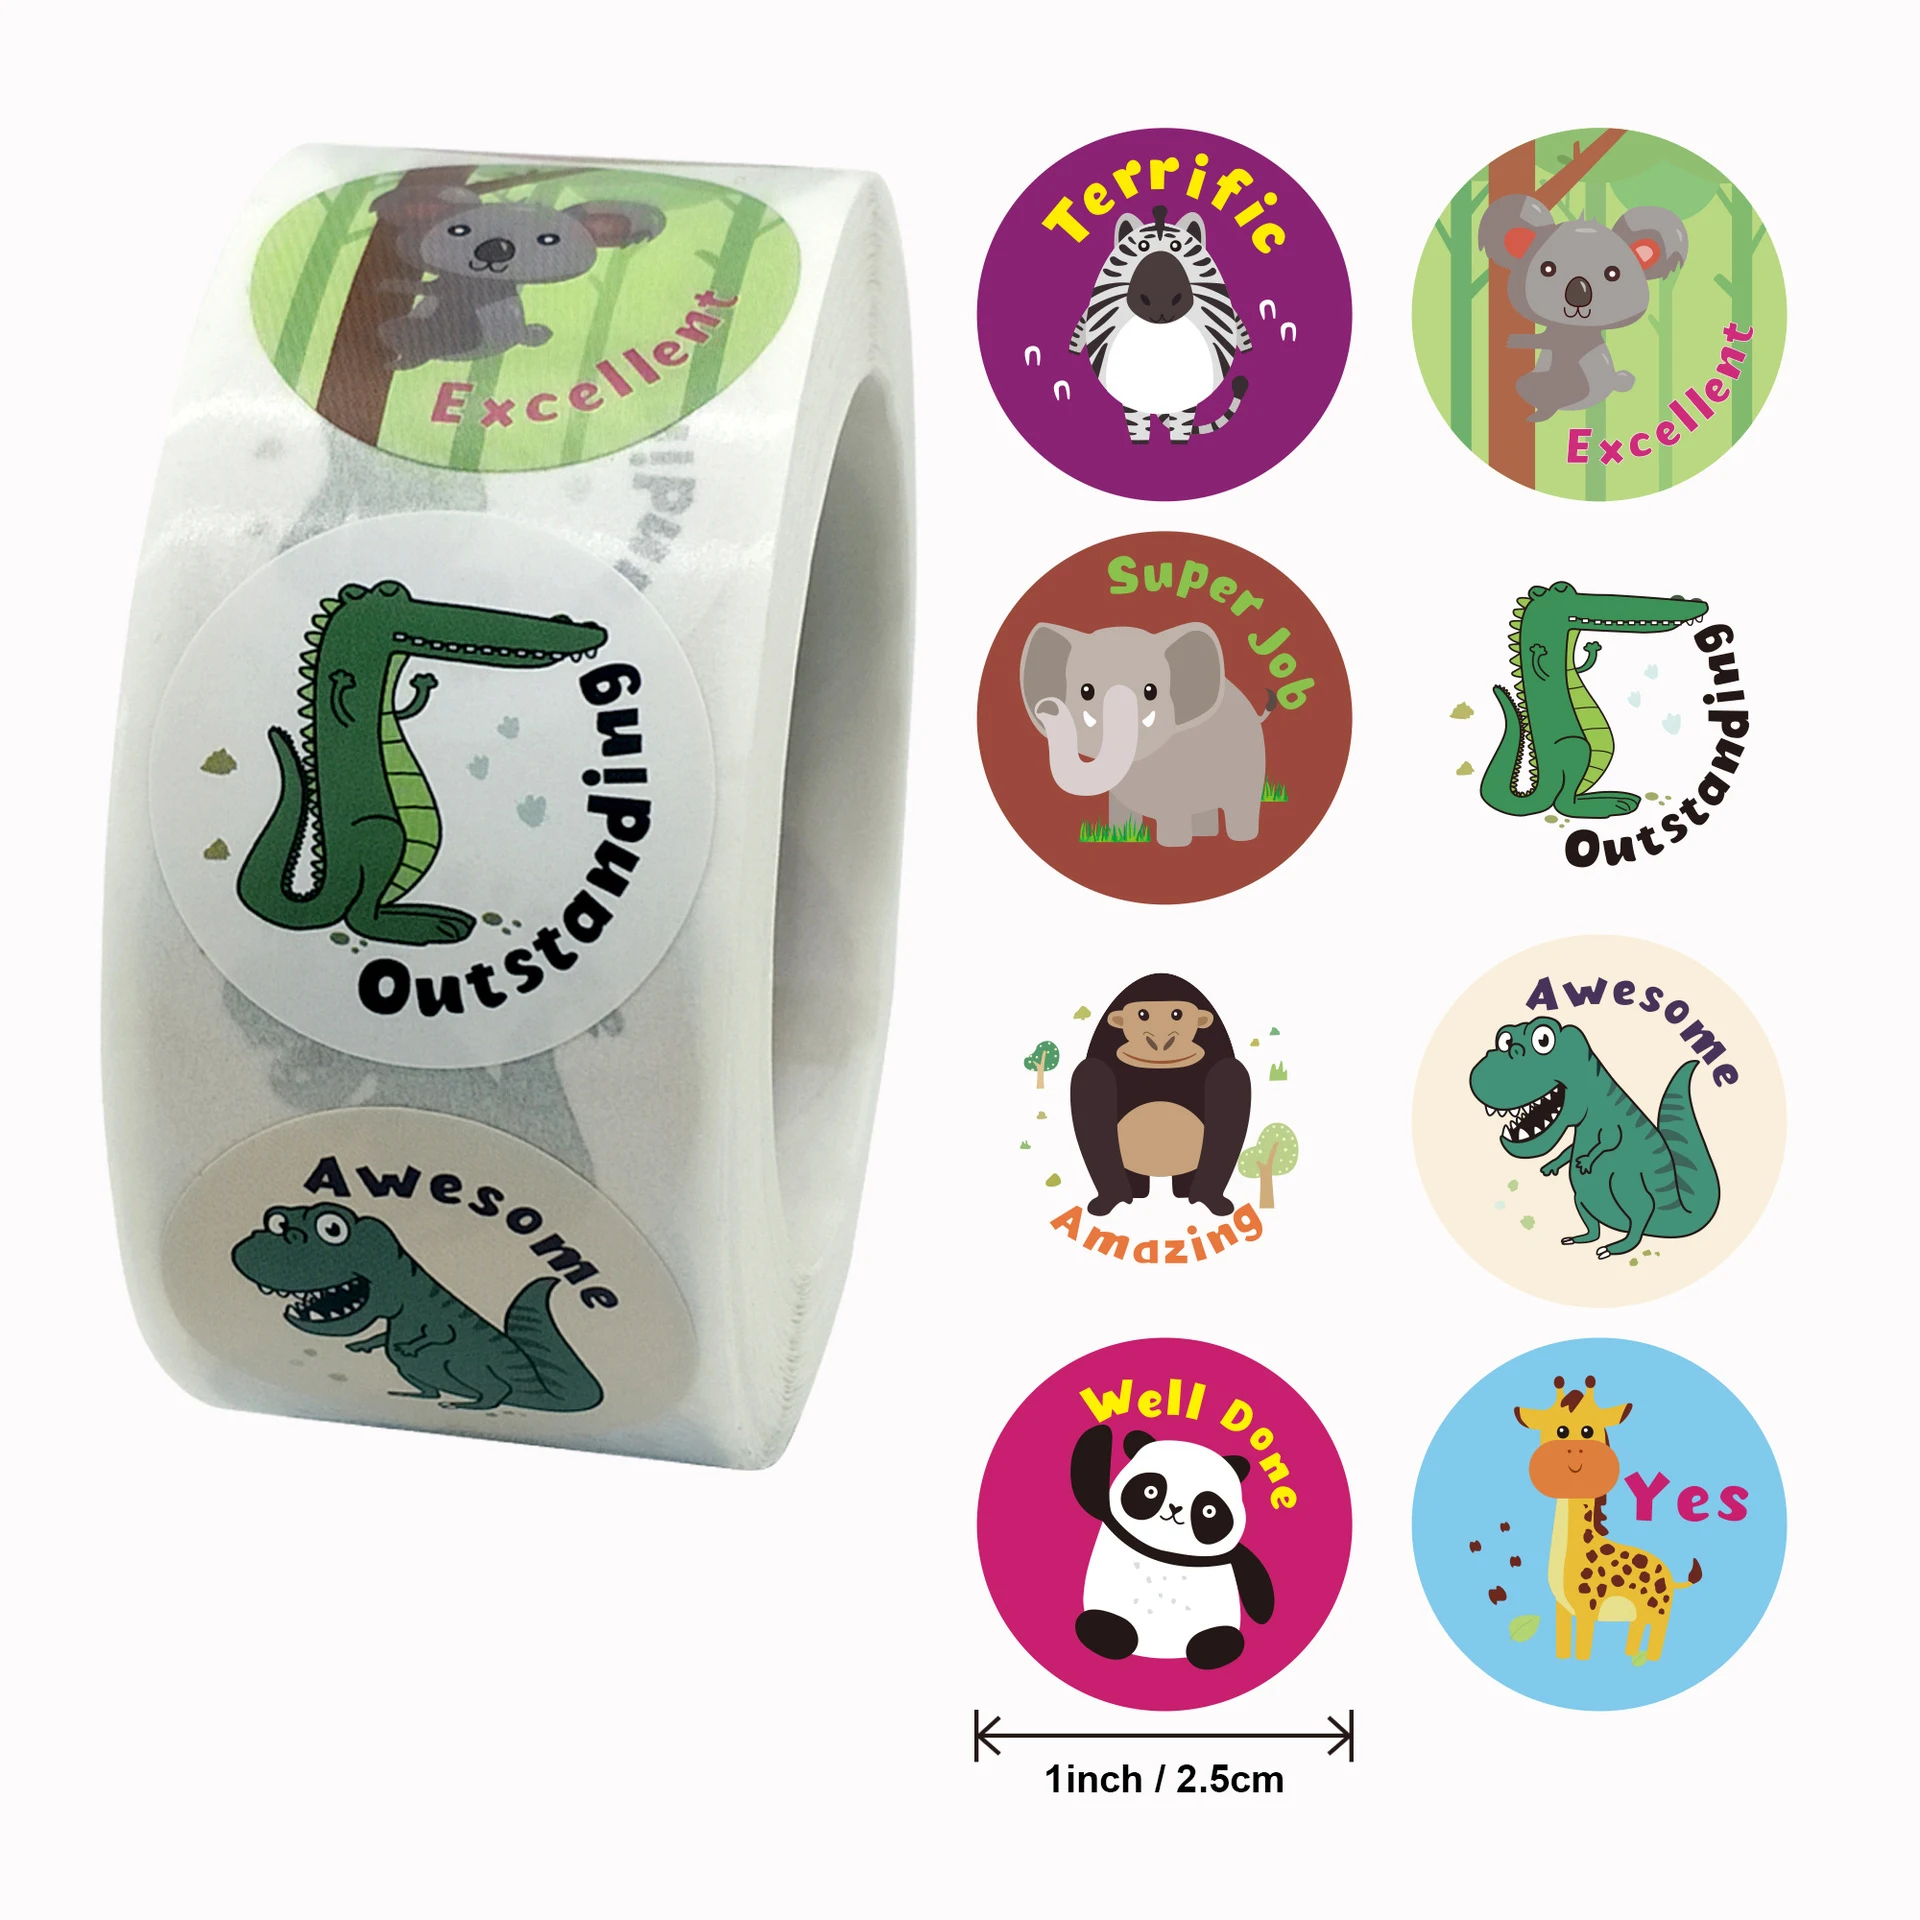 Carton waterproof customized labels printer roll label stickers for child teacher